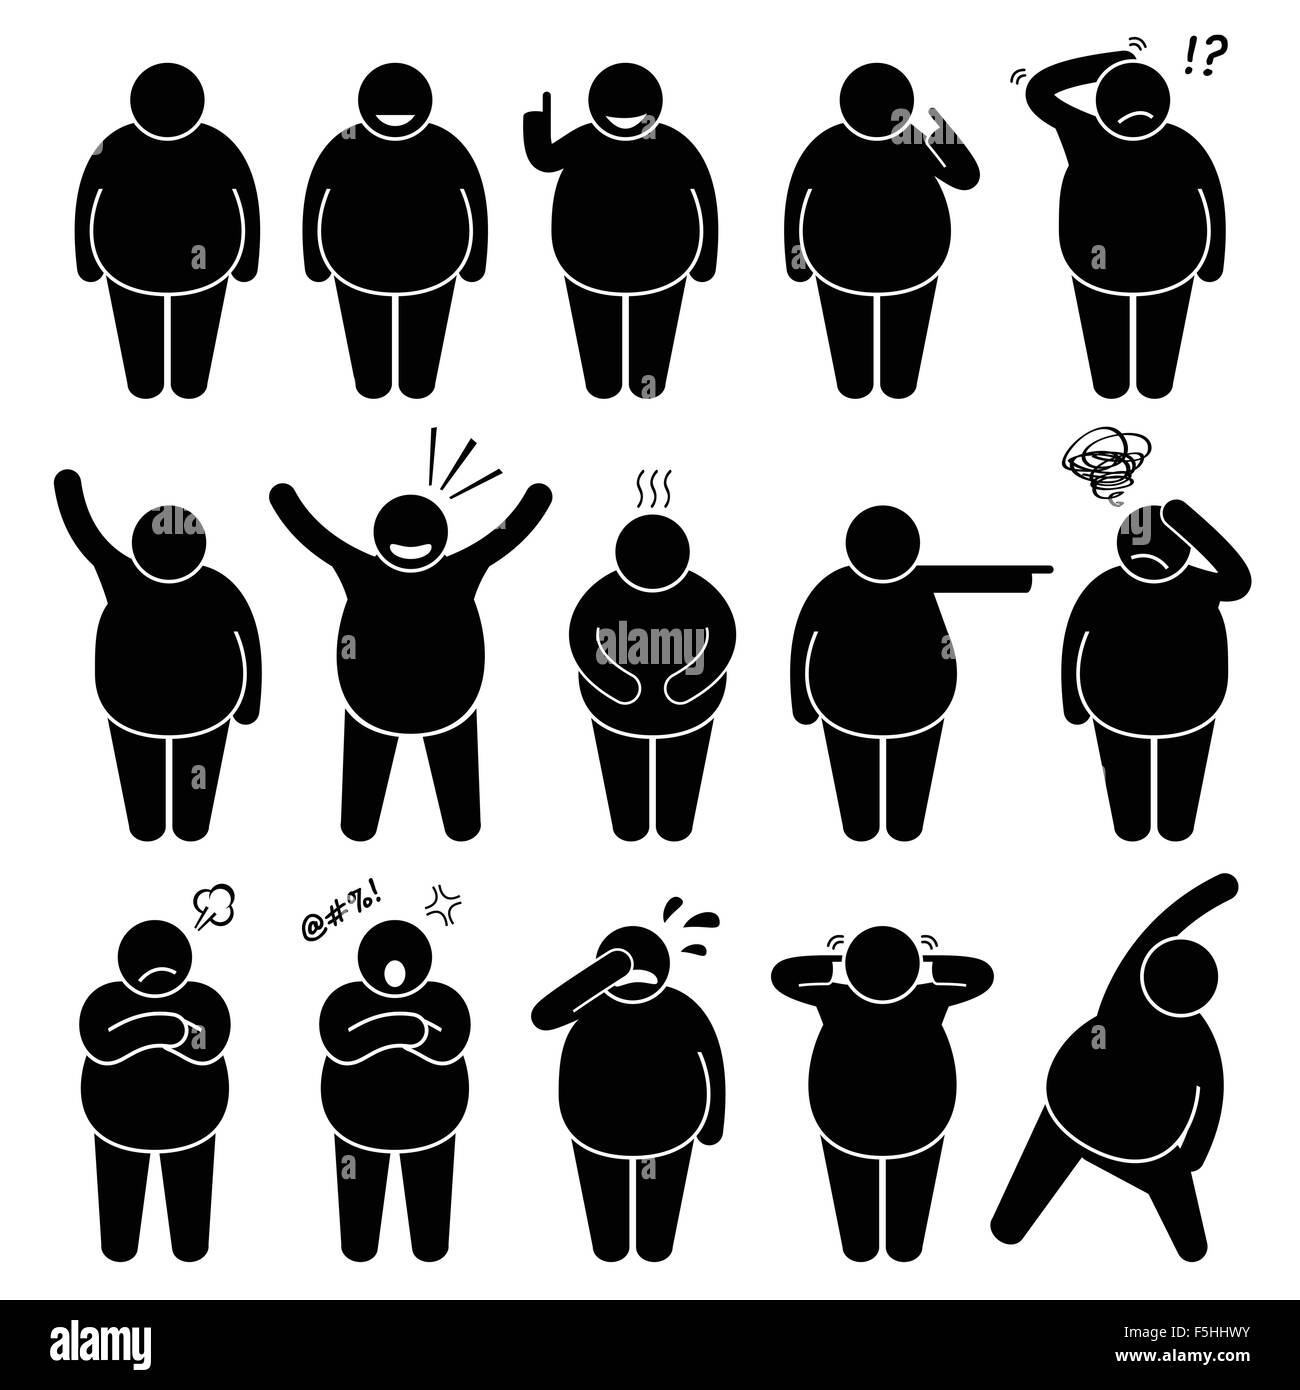 Fat Man Action Poses Postures Stick Figure Pictogram Icons Stock Vector